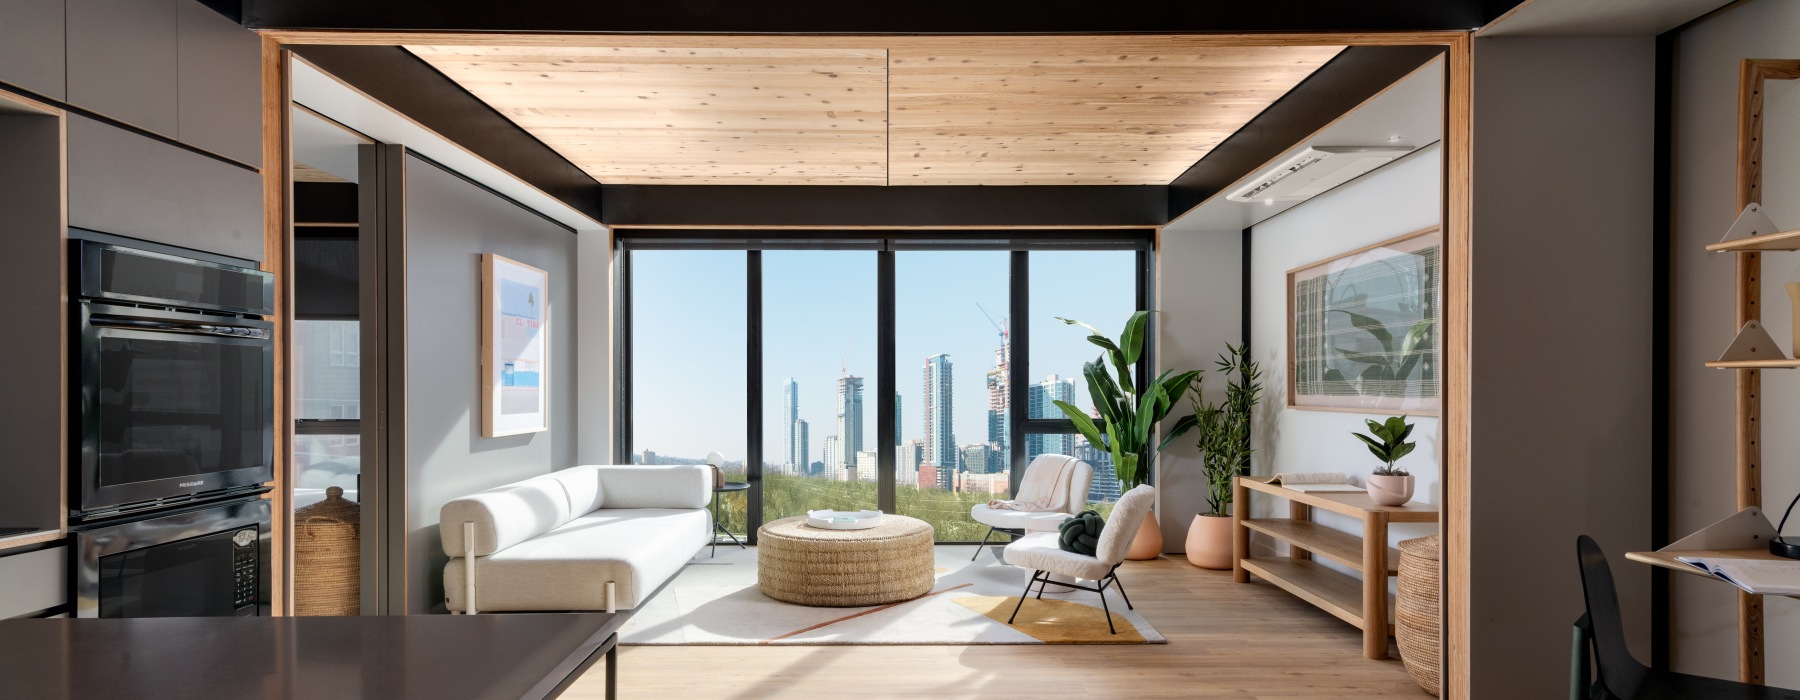 1-Bedroom living area with downtown view